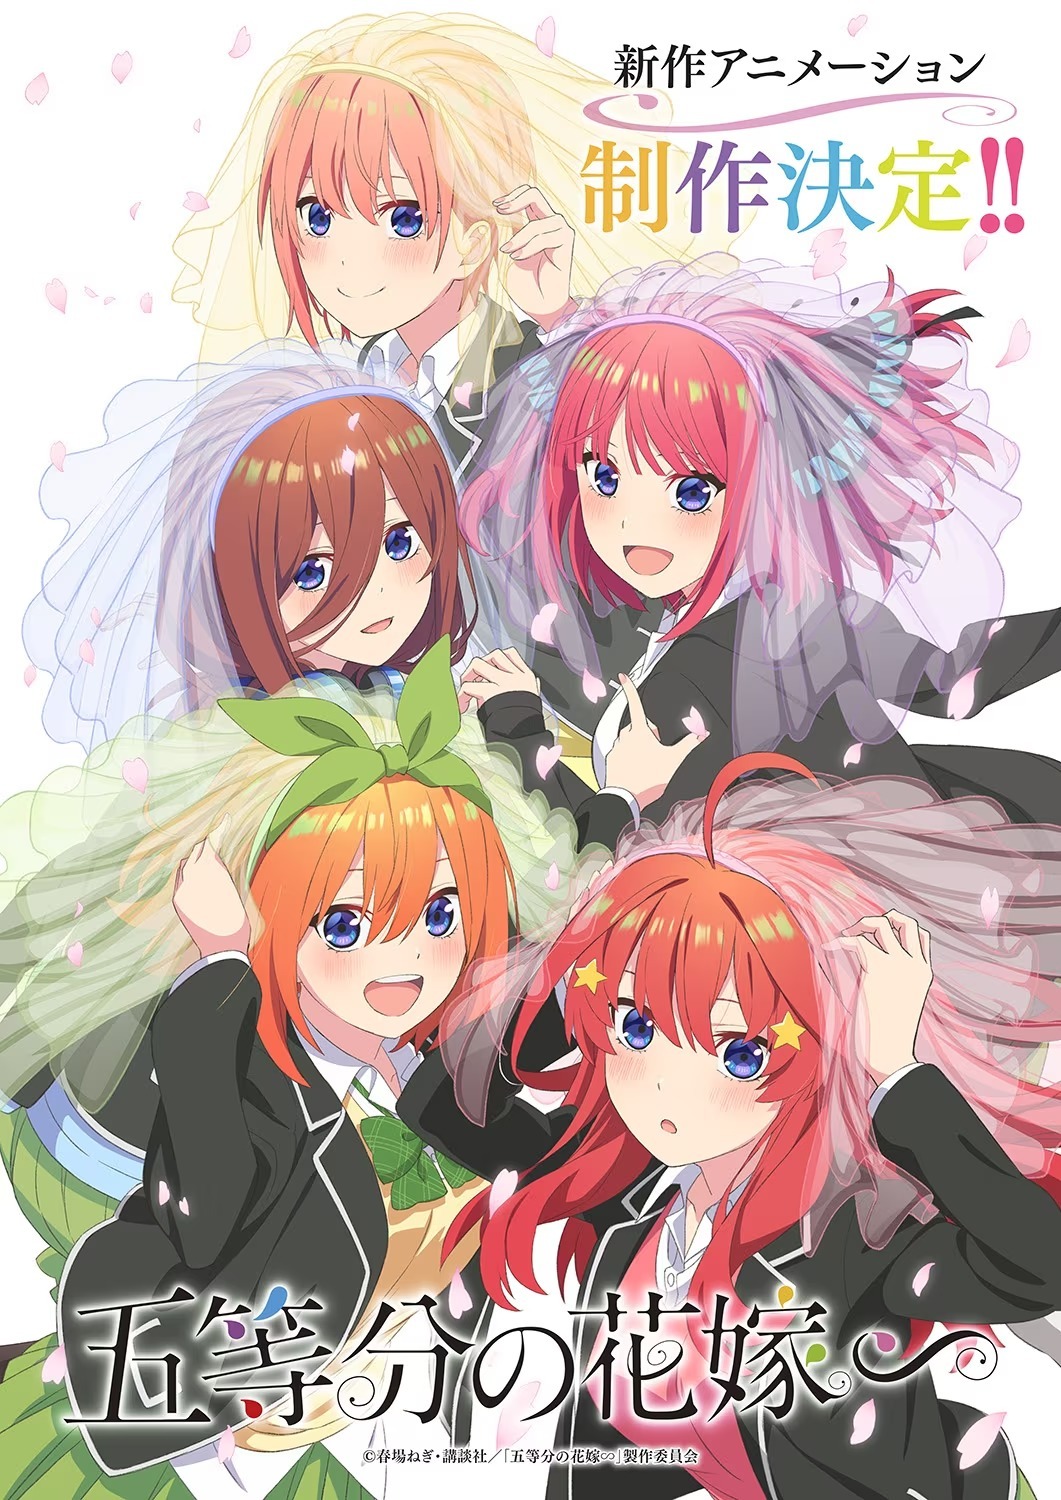 The Quintessential Quintuplets Movie Movie - Watch on Crunchyroll